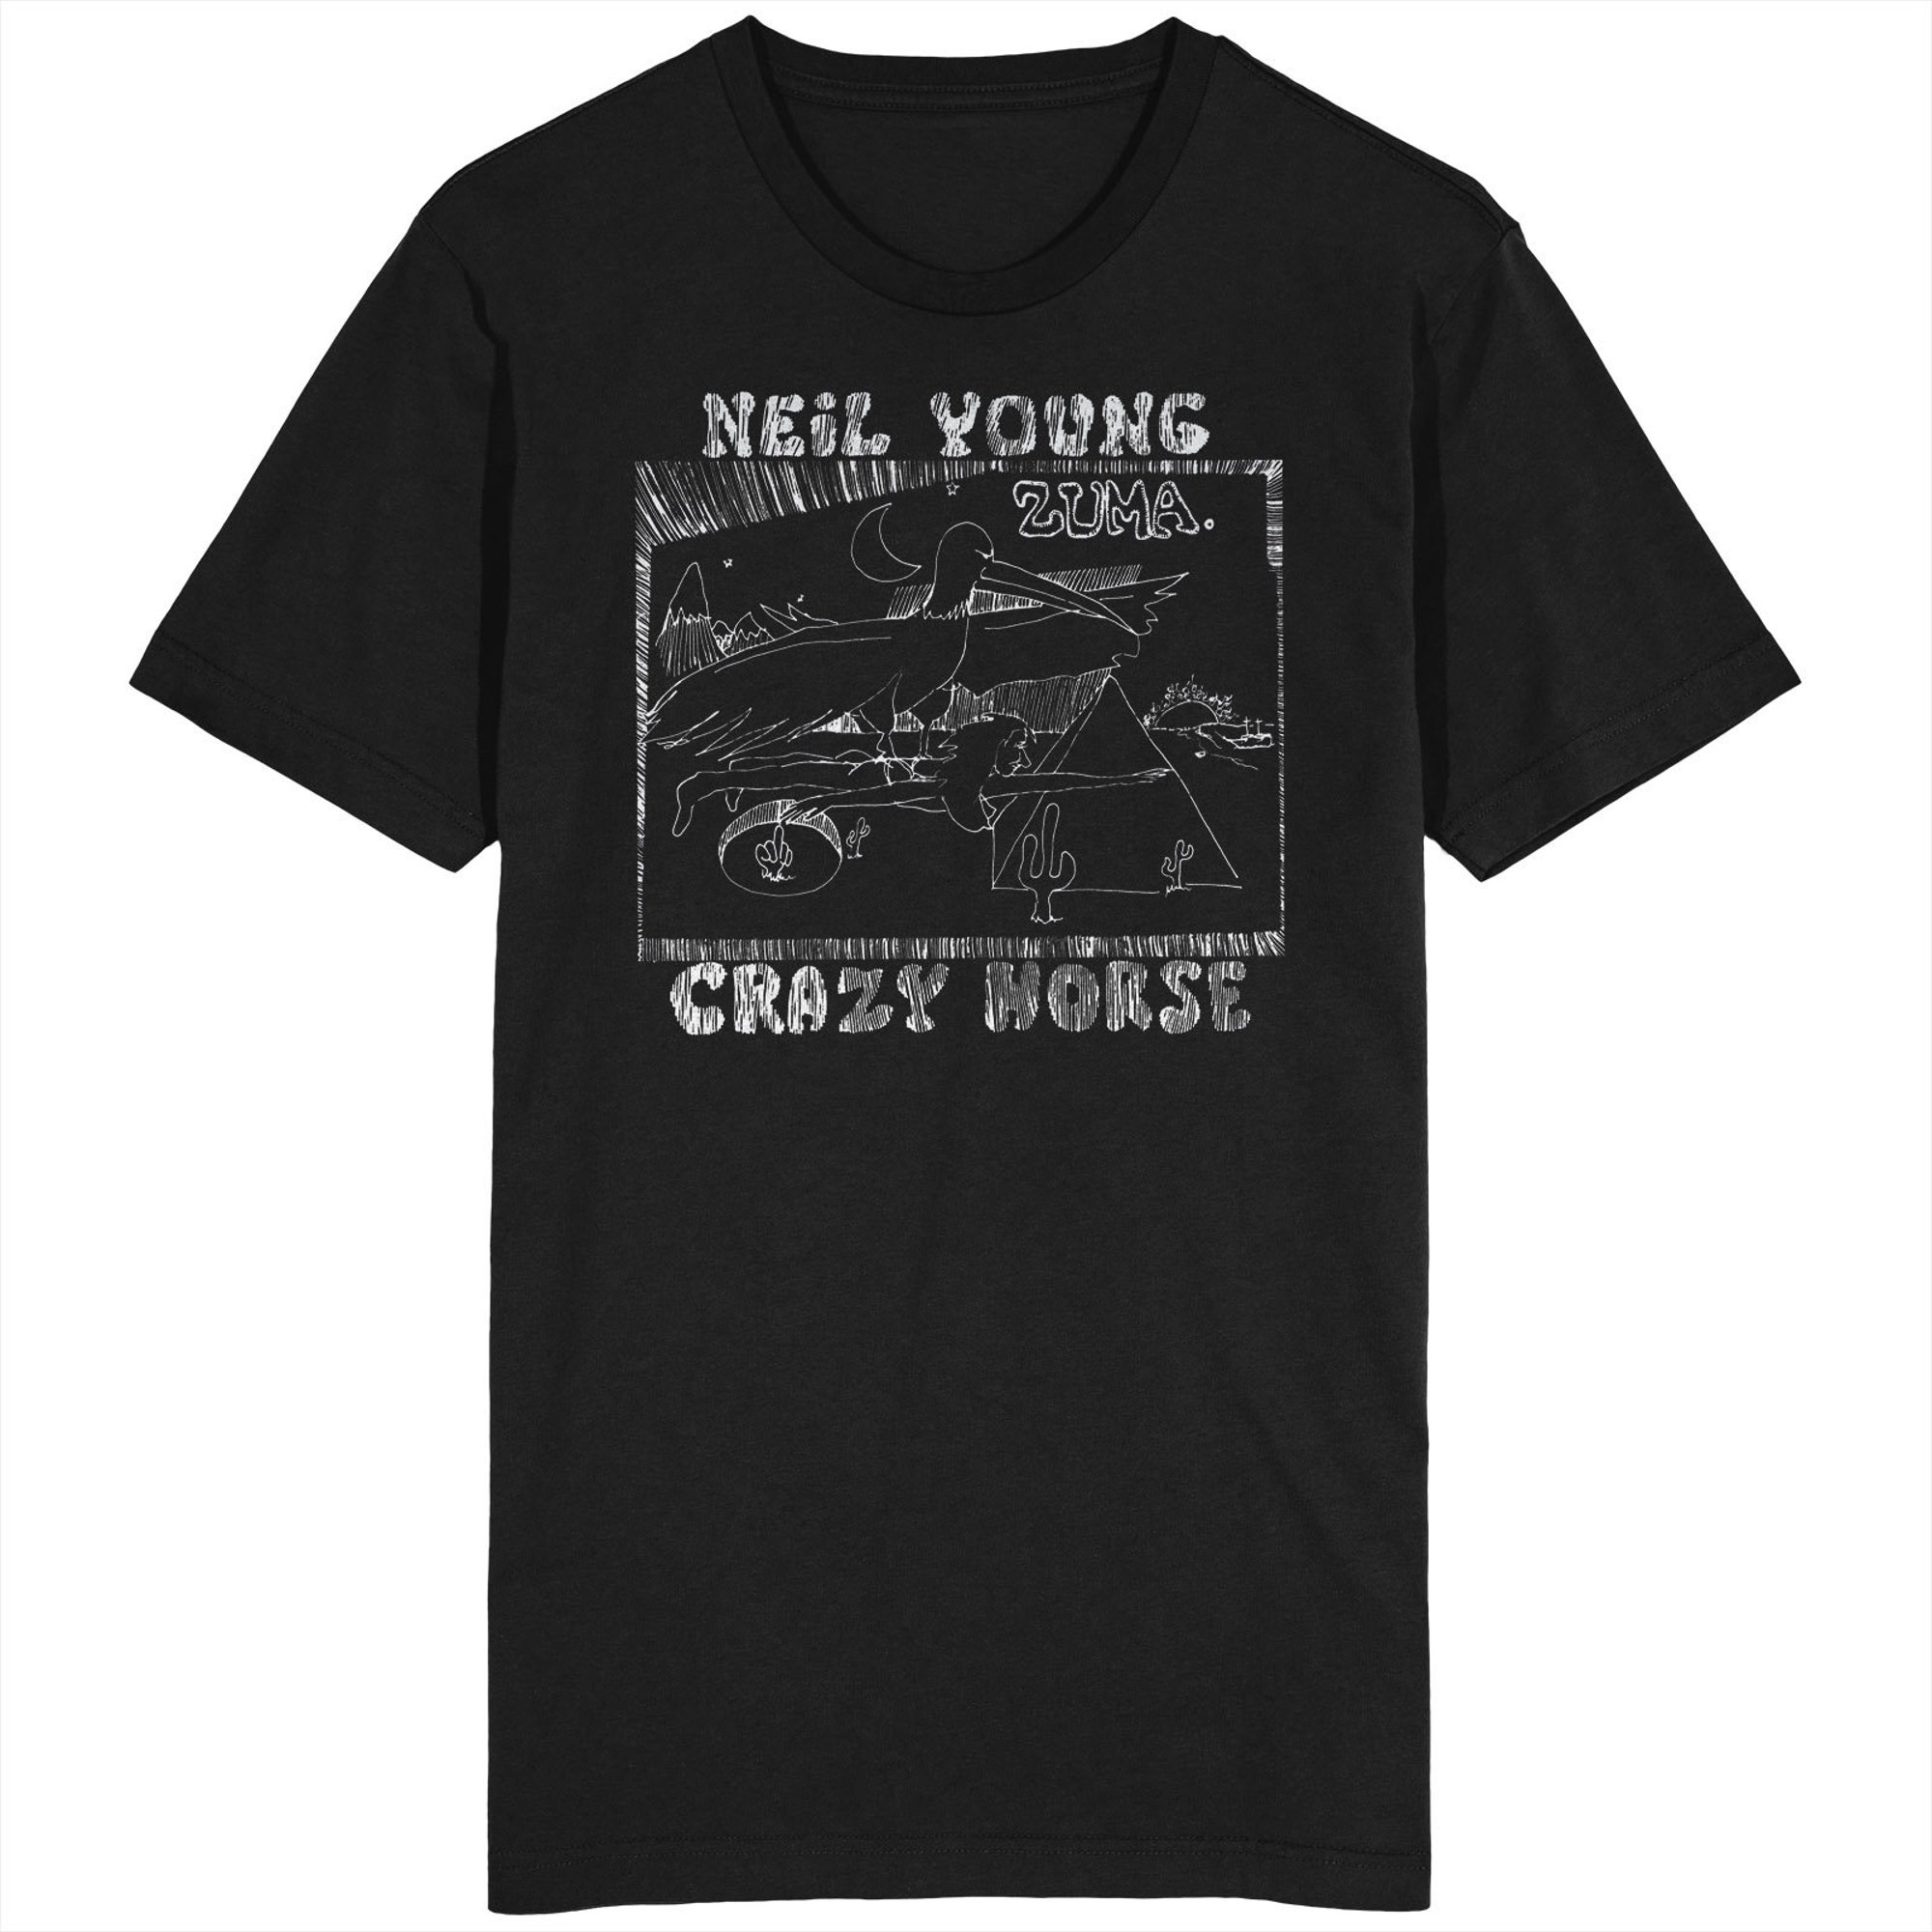 Neil Young And Crazy Horse Zuma T-shirt Top Reprise Records Cortez The Killer